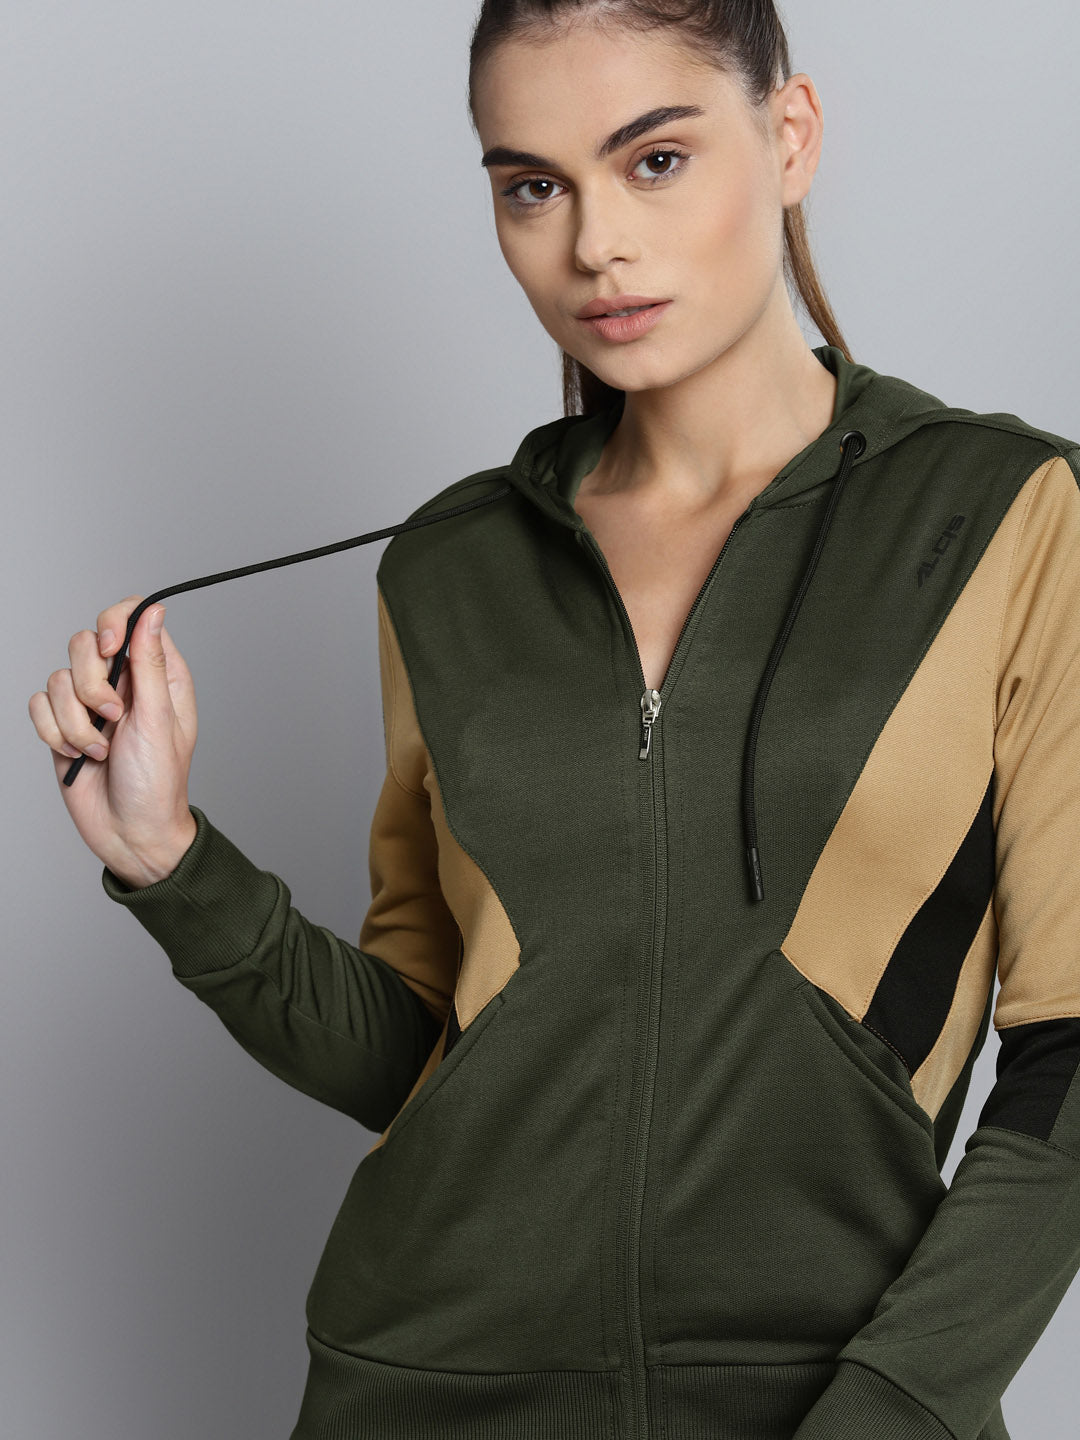 Alcis Women Solid Olive Jackets